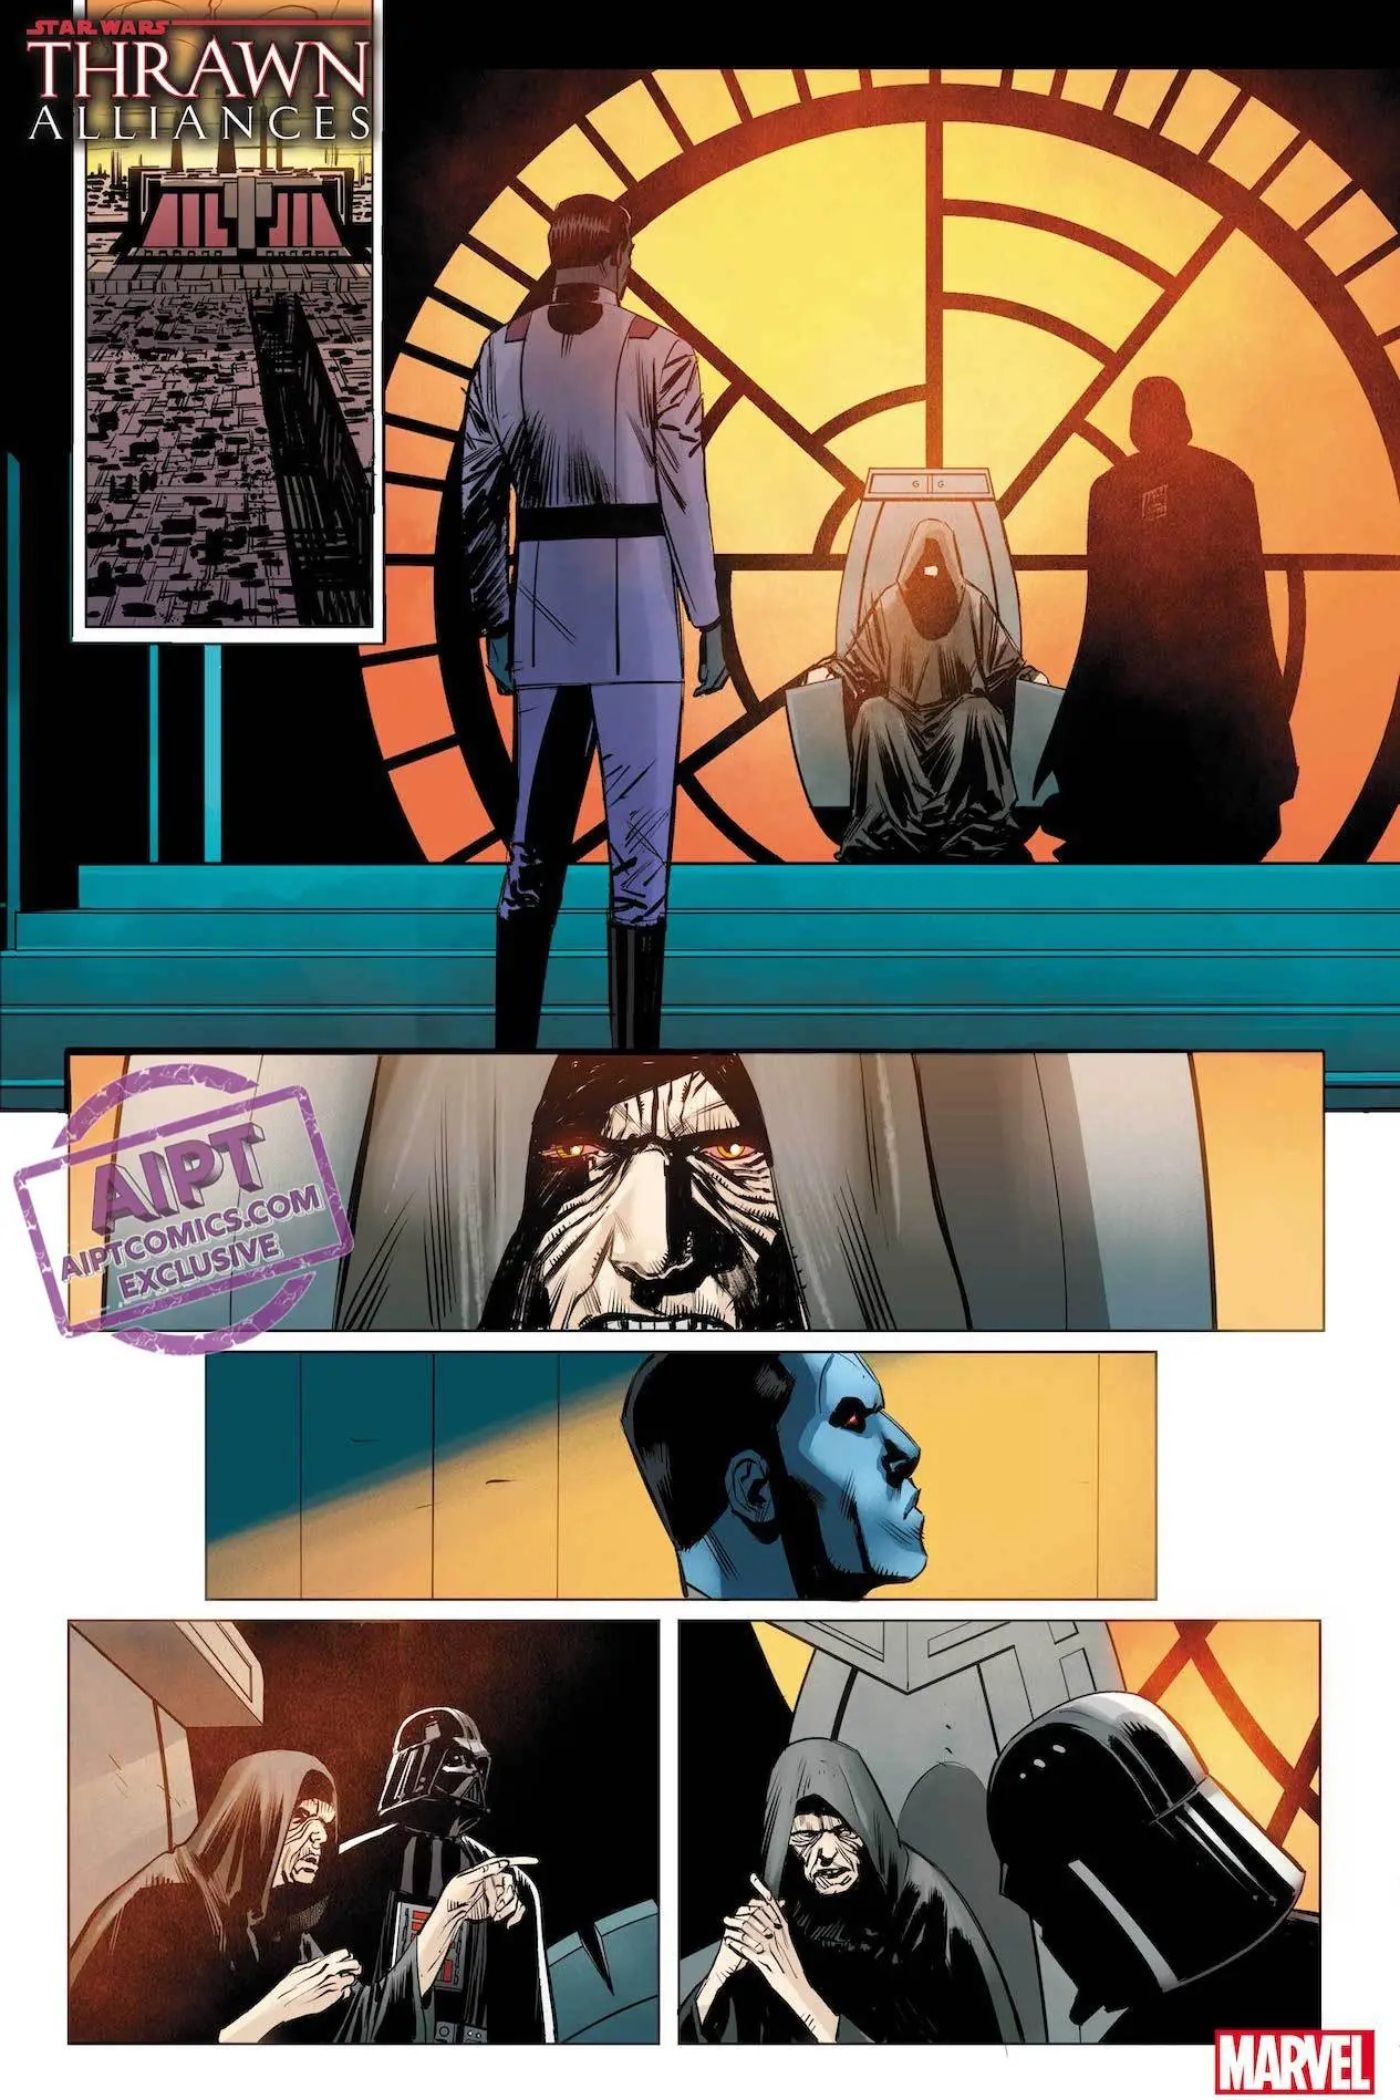 Star Wars: Thrawn Alliances #1 Preview page 2. 